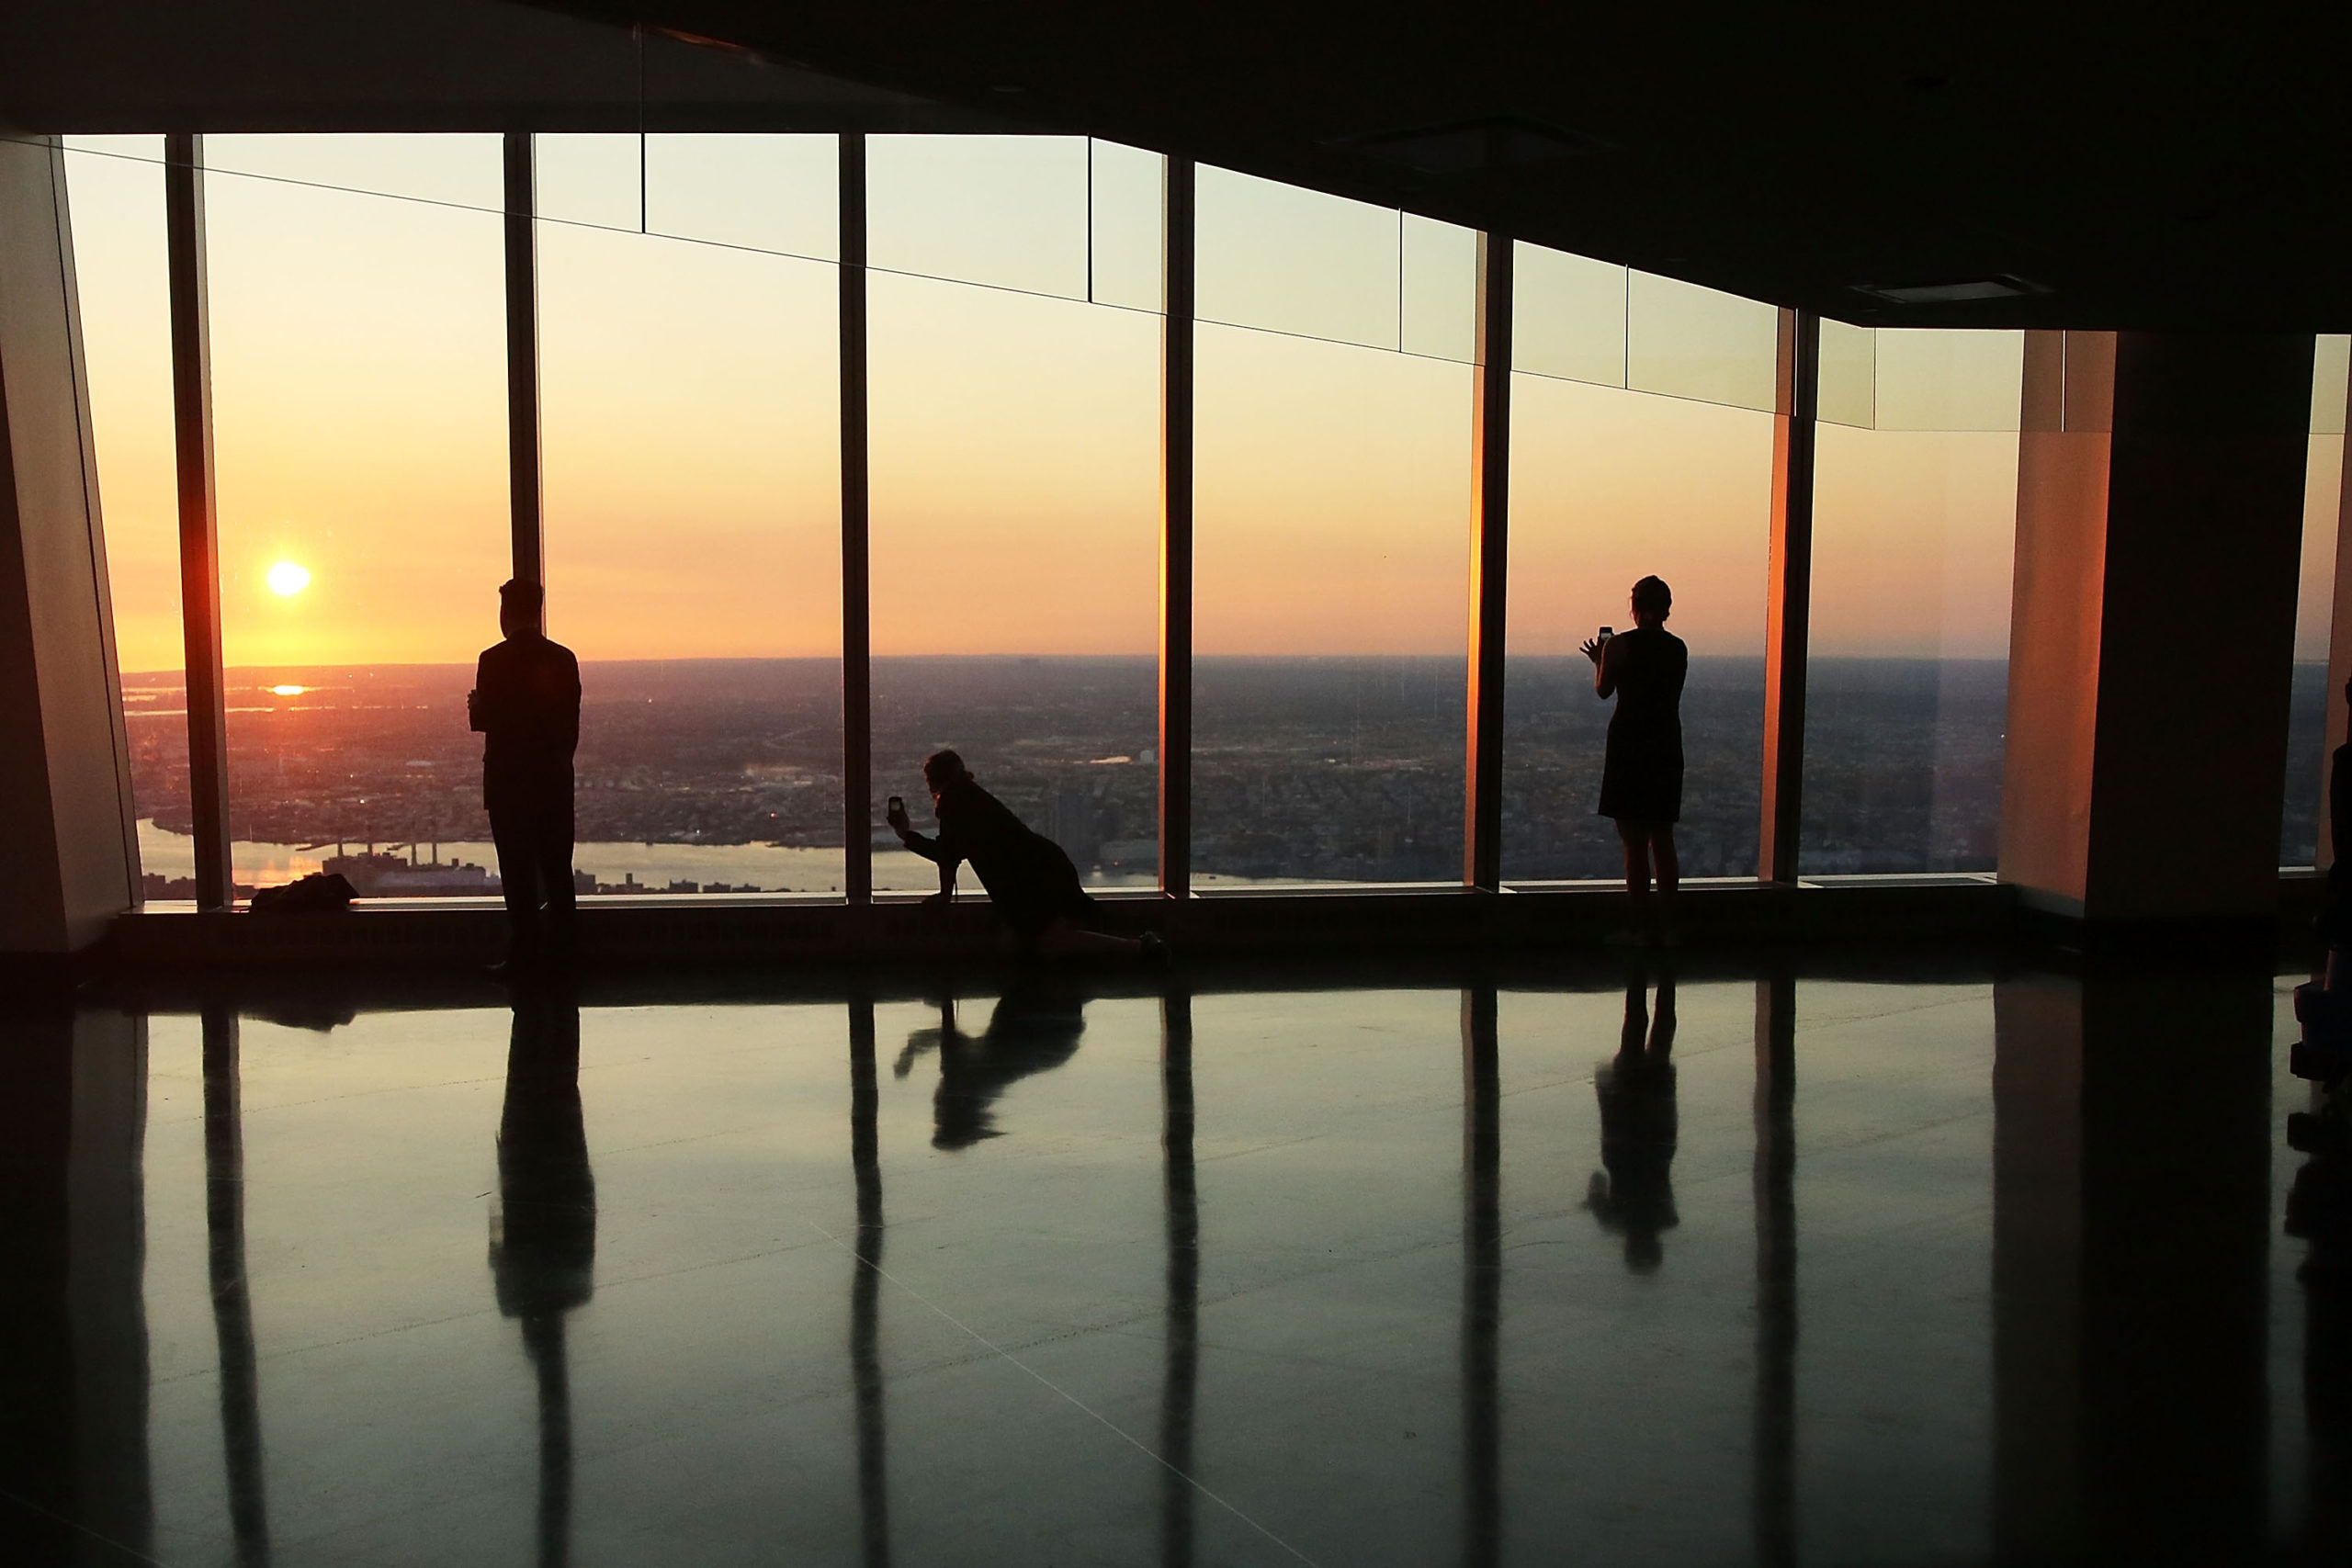 This Is What Sunrise Looks Like From The Tallest Building In America